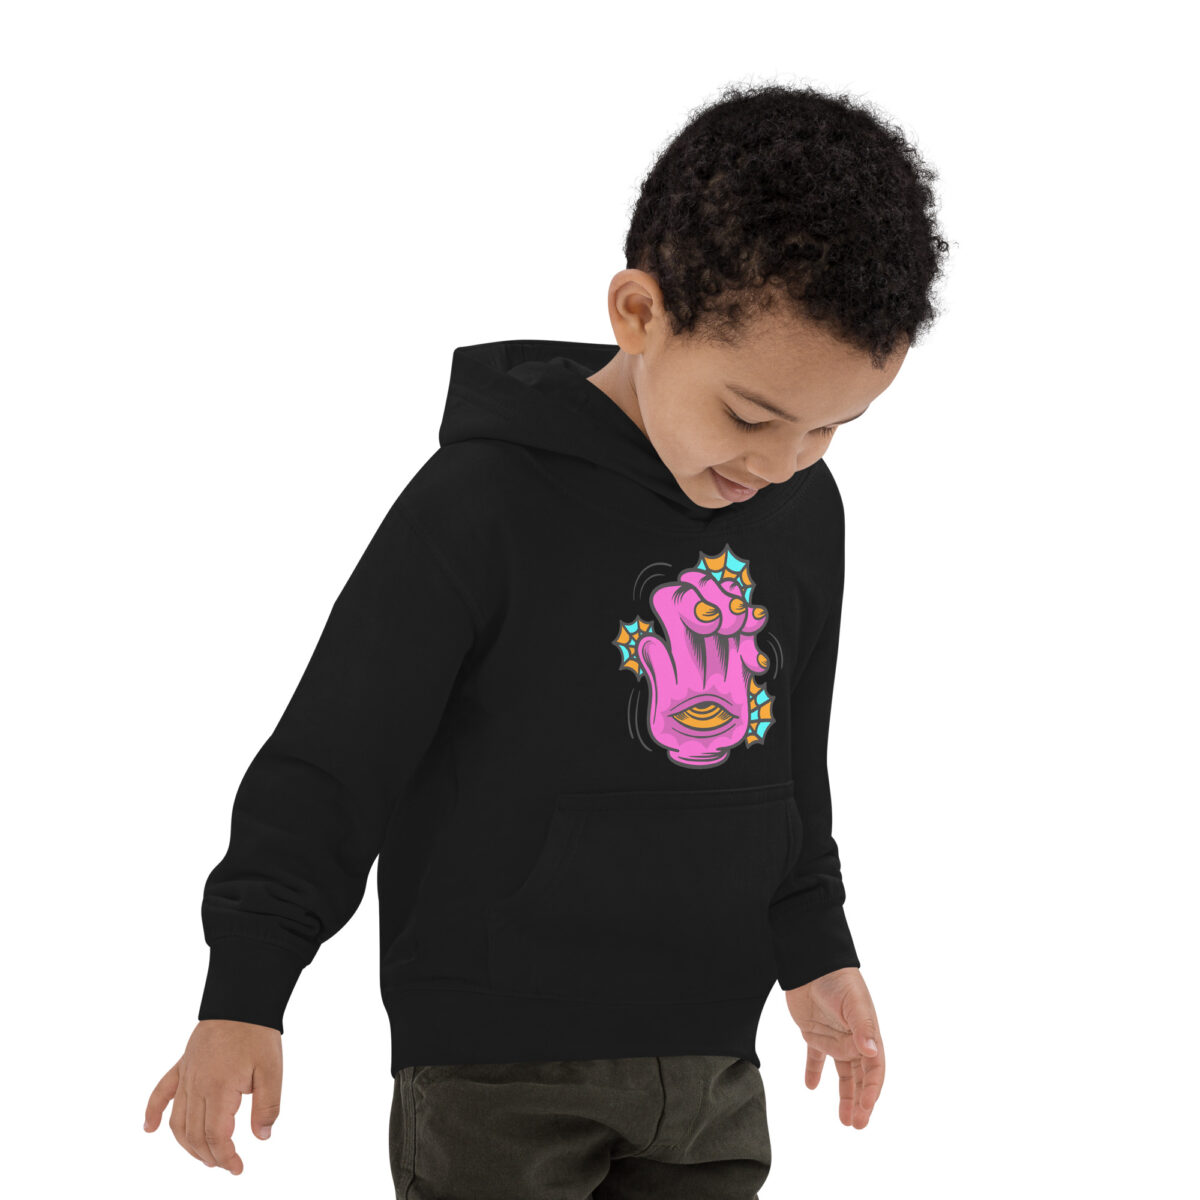 kids hoodie jet black right front 6475c837e9eed